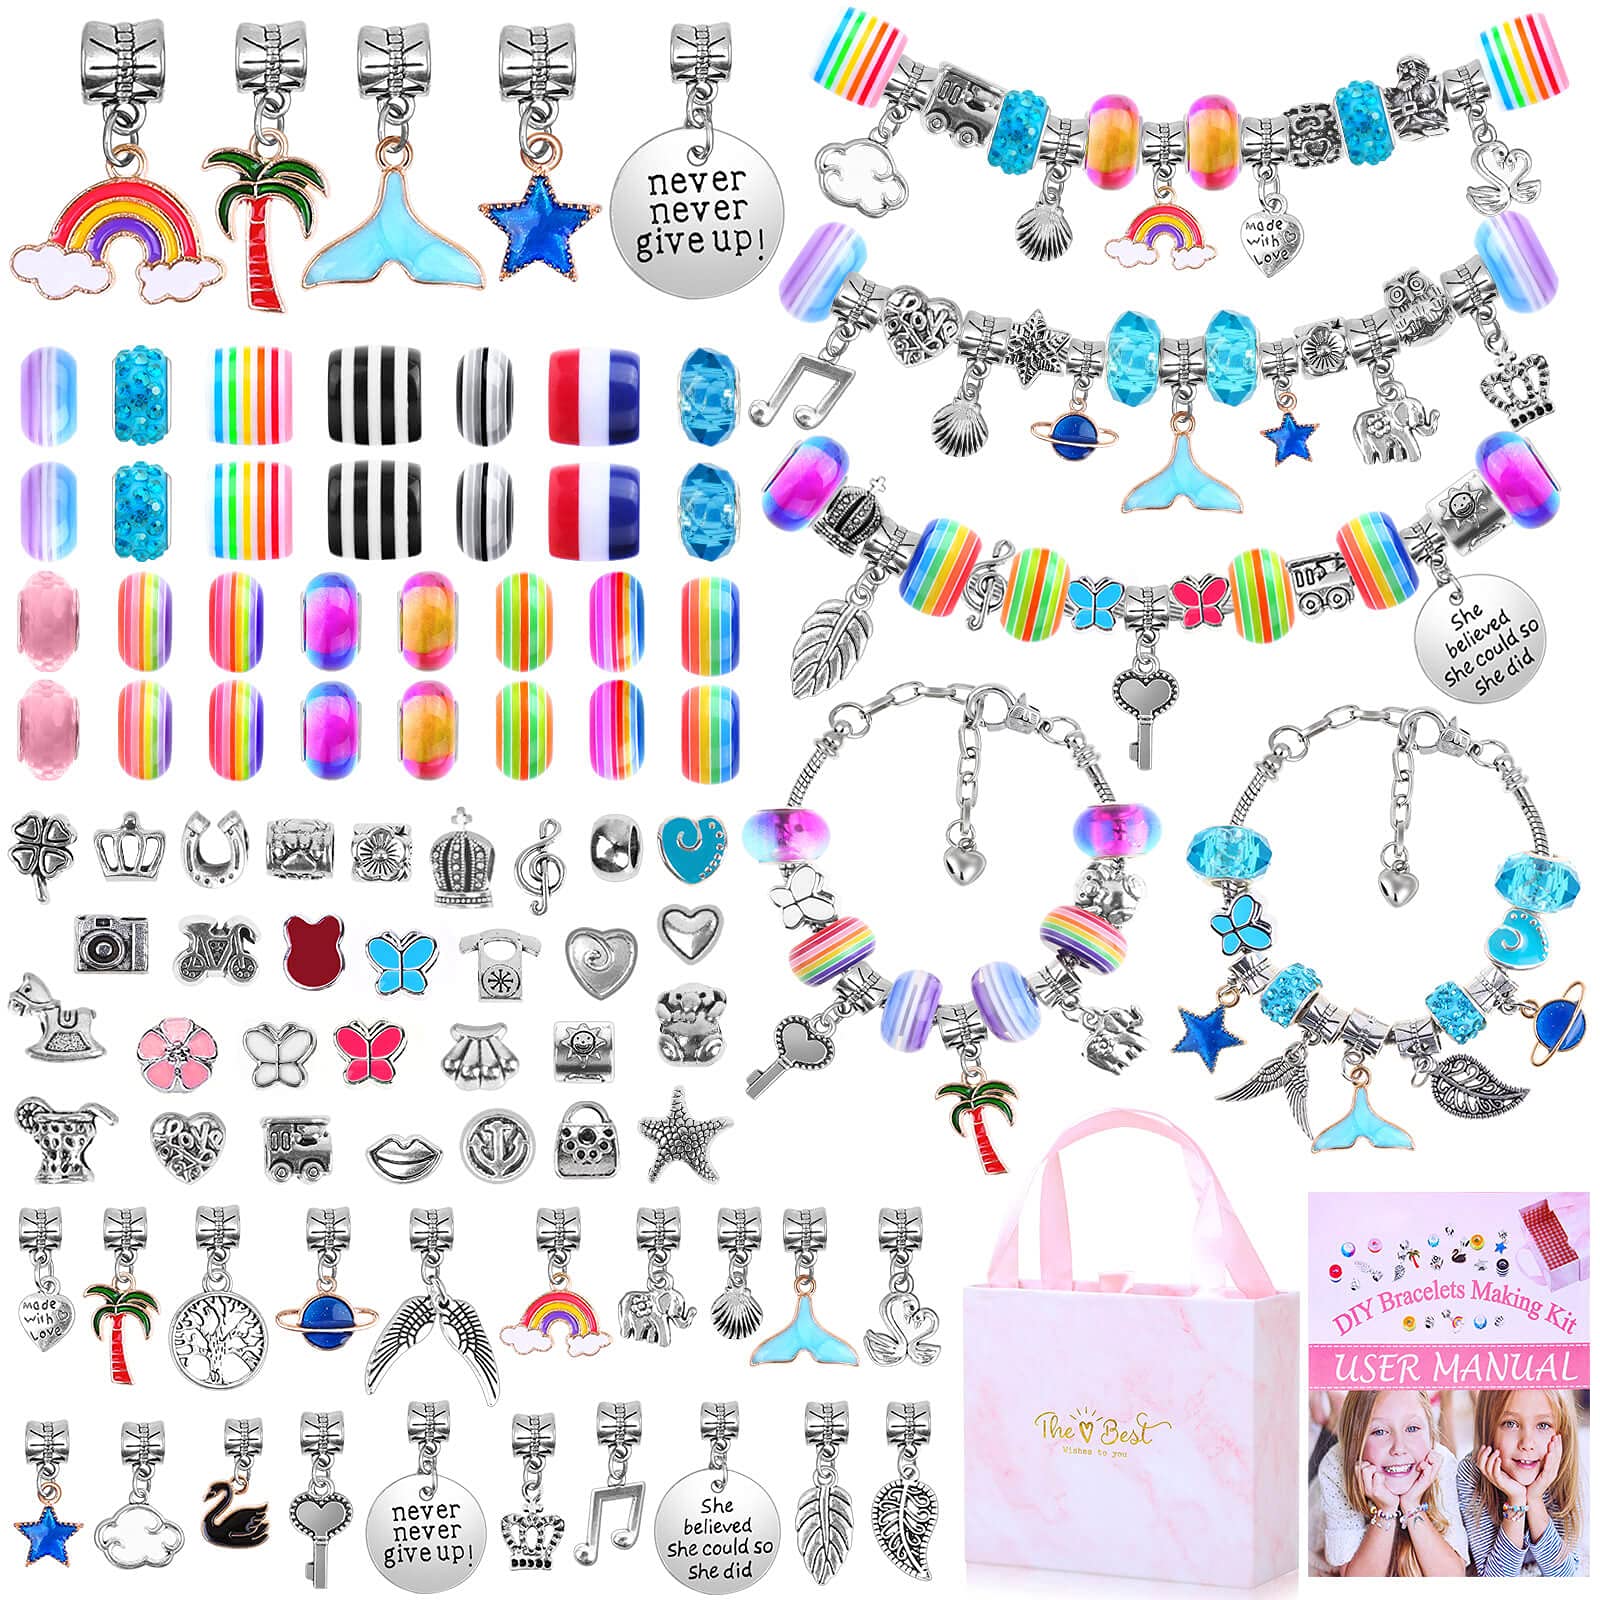 Bracelet Making Kit for Girls Flasoo 85PCs Charm Bracelets Kit with Beads  Jewelry Charms Bracelets for DIY Craft Jewelry Gift for Teen Girls